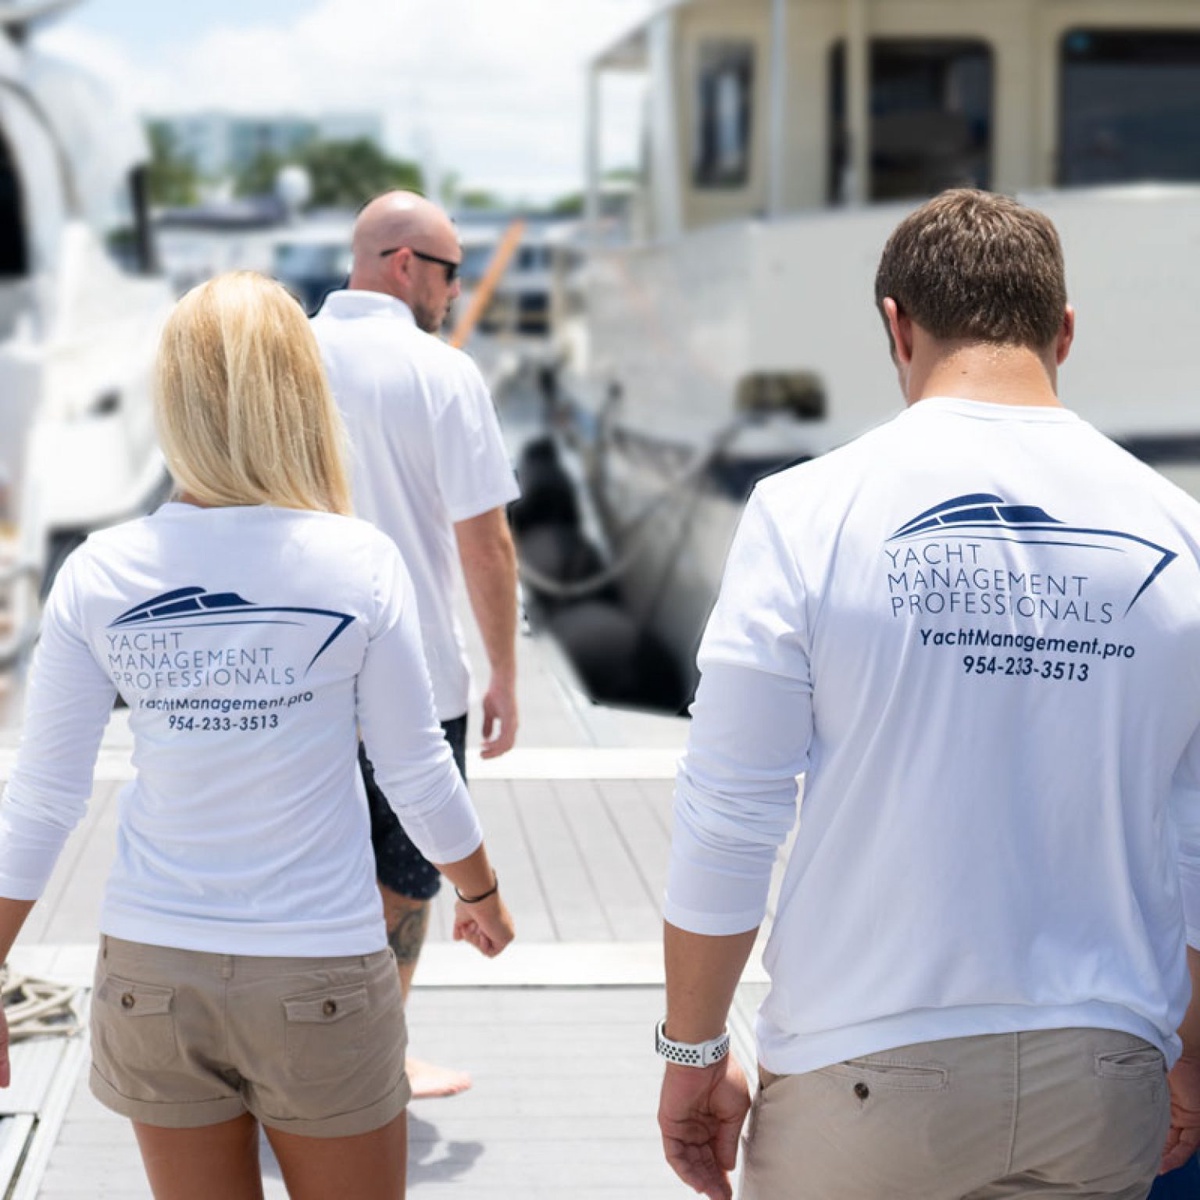 Yacht Management Companies in Florida: Enhancing Yacht Ownership and Experience